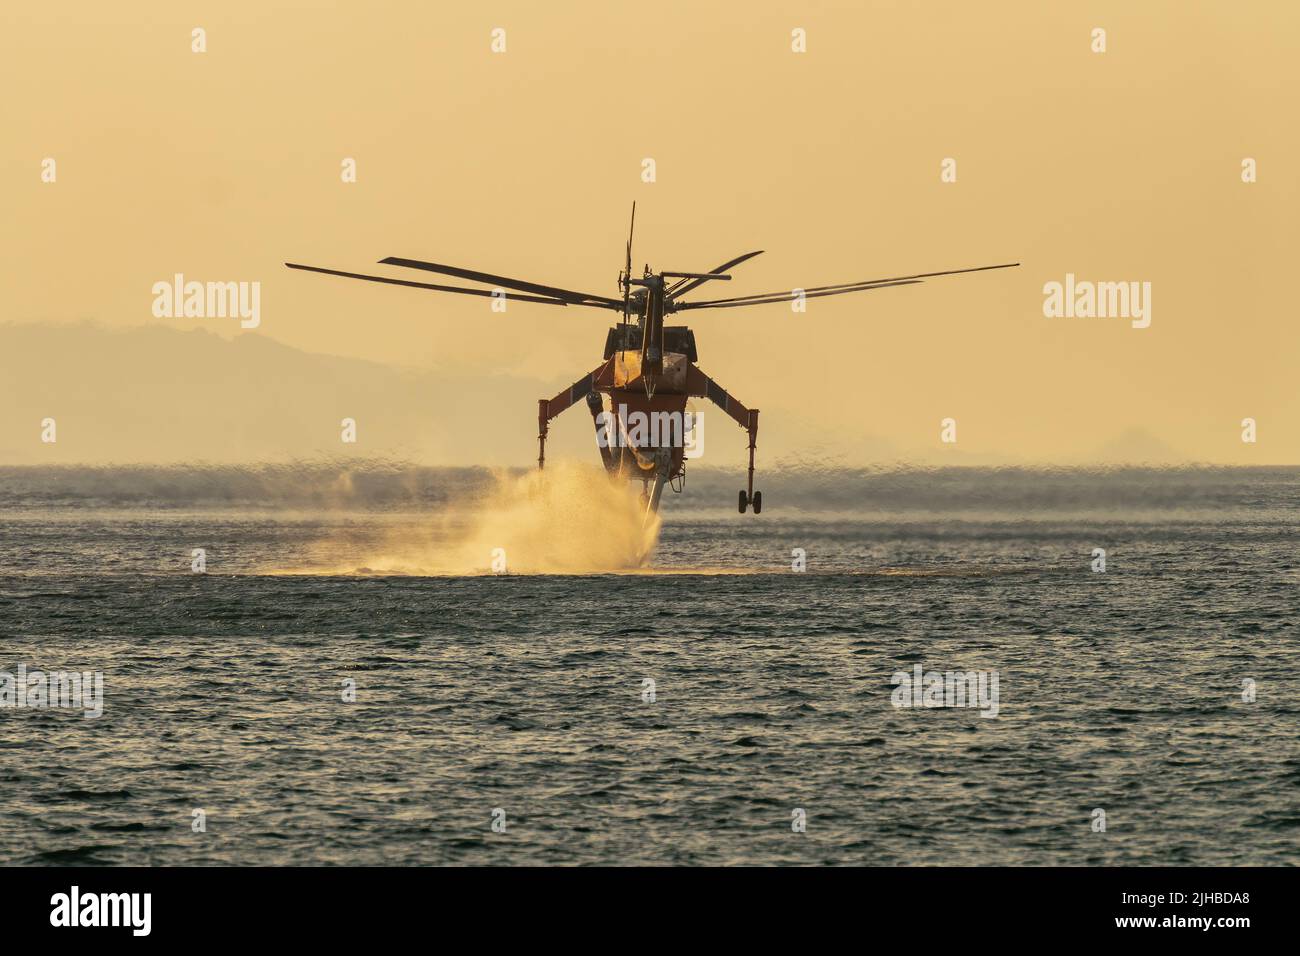 Loutraki, Greece 14 September 2019. Fire helicopter Sikorsky S-64 up in the sky at Loutraki in Greece for the big fire. Stock Photo